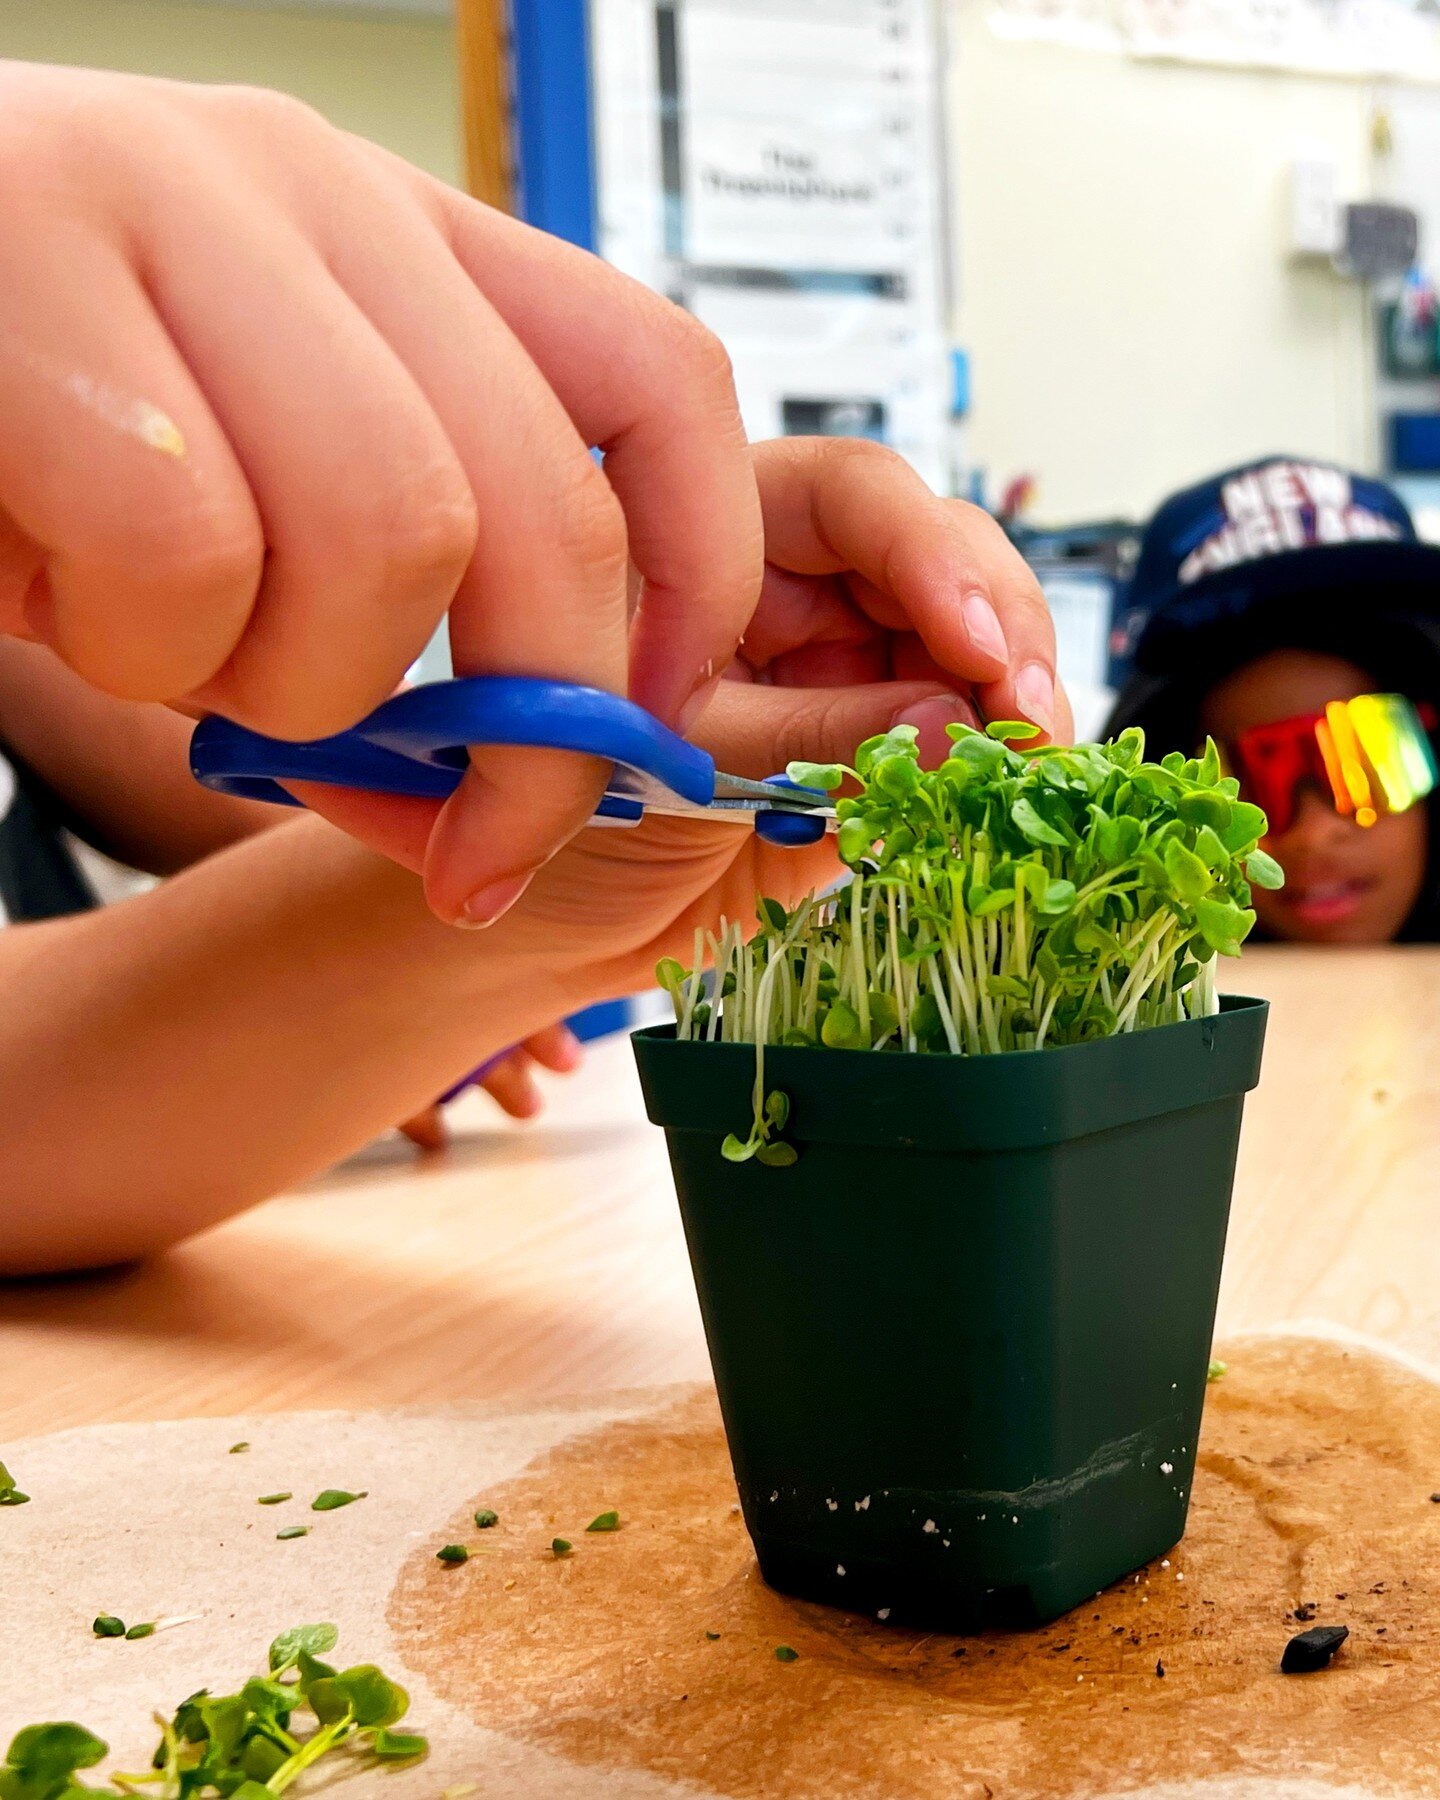 Step 1: Grow microgreens in your classroom
Step 2: Harvest your very own microgreens (and give it a taste test, if you want!)
Step 3: Taco party.

All you need to do is bring @bostonyfp to your classroom. We&rsquo;ll handle the rest! 

#bostonyouthfa